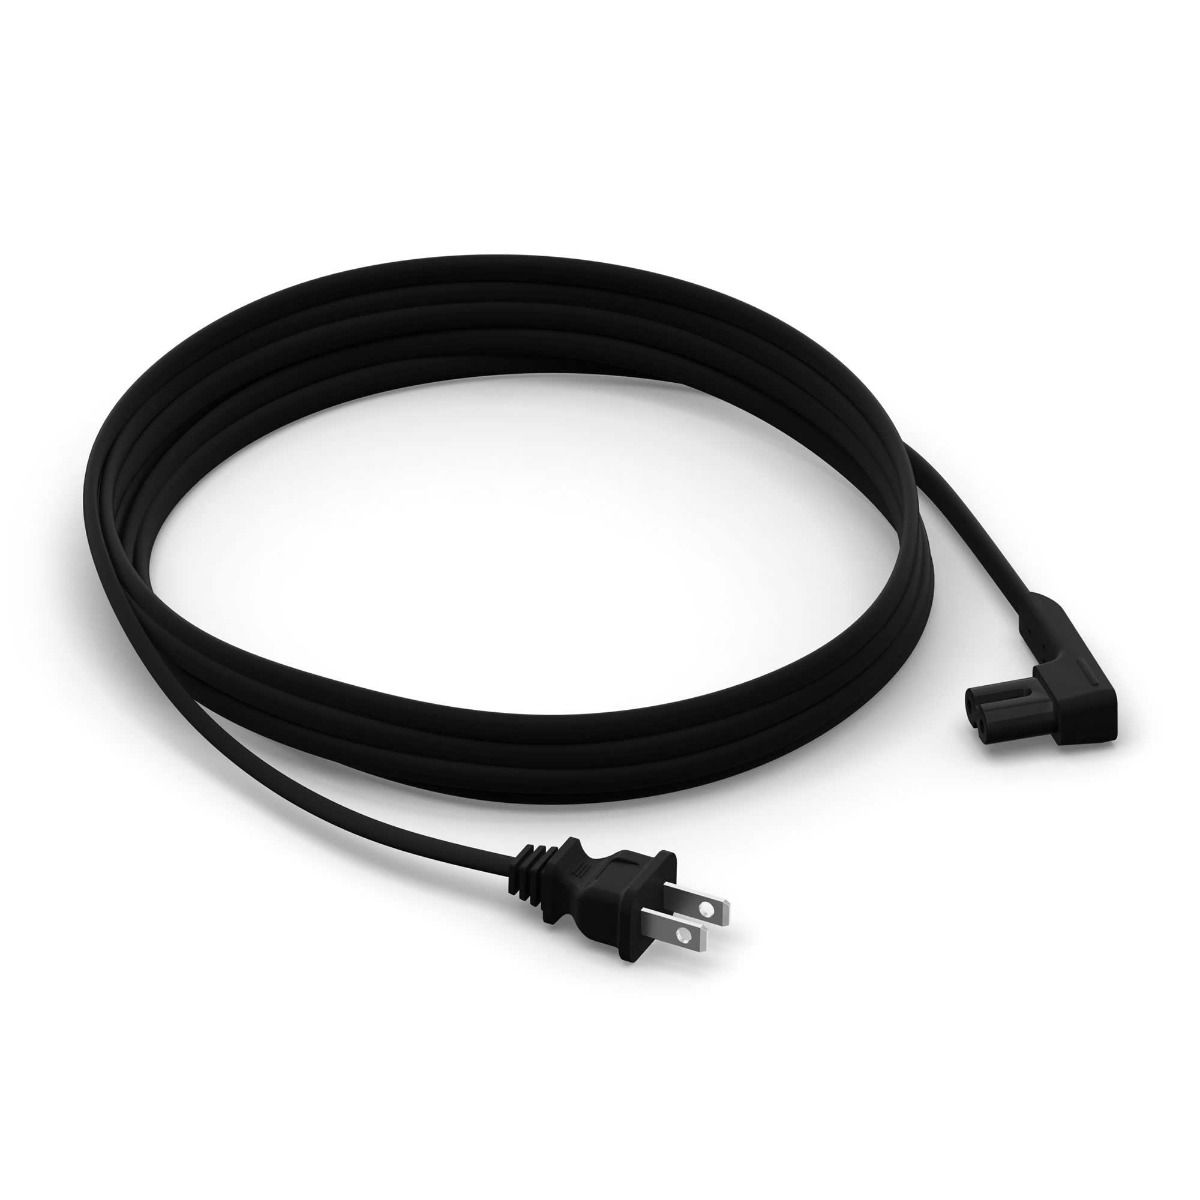 Sonos Power Cables for Sonos One